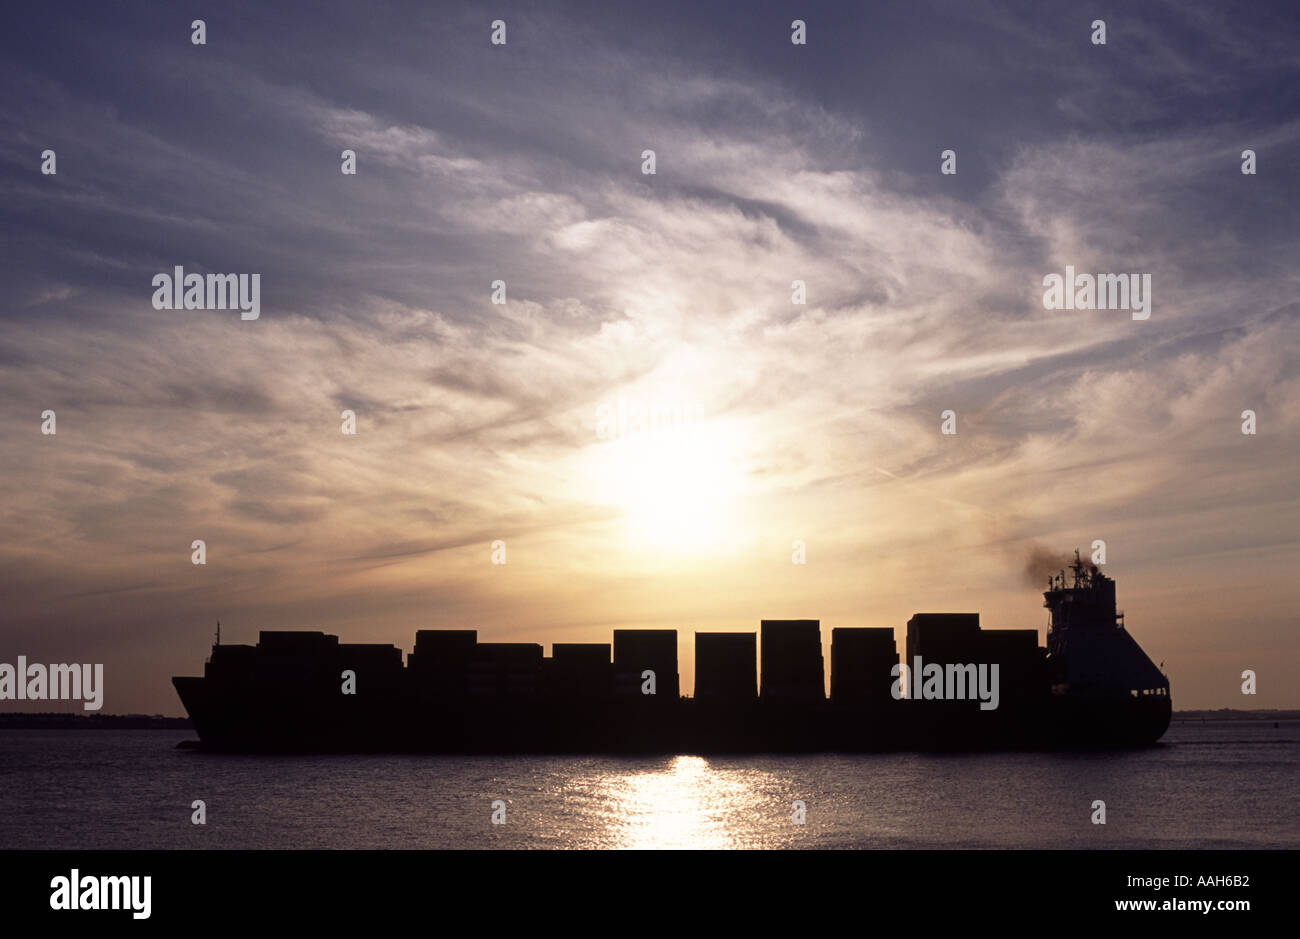 Container ship at the port of Felixstowe, Suffolk, UK. Stock Photo